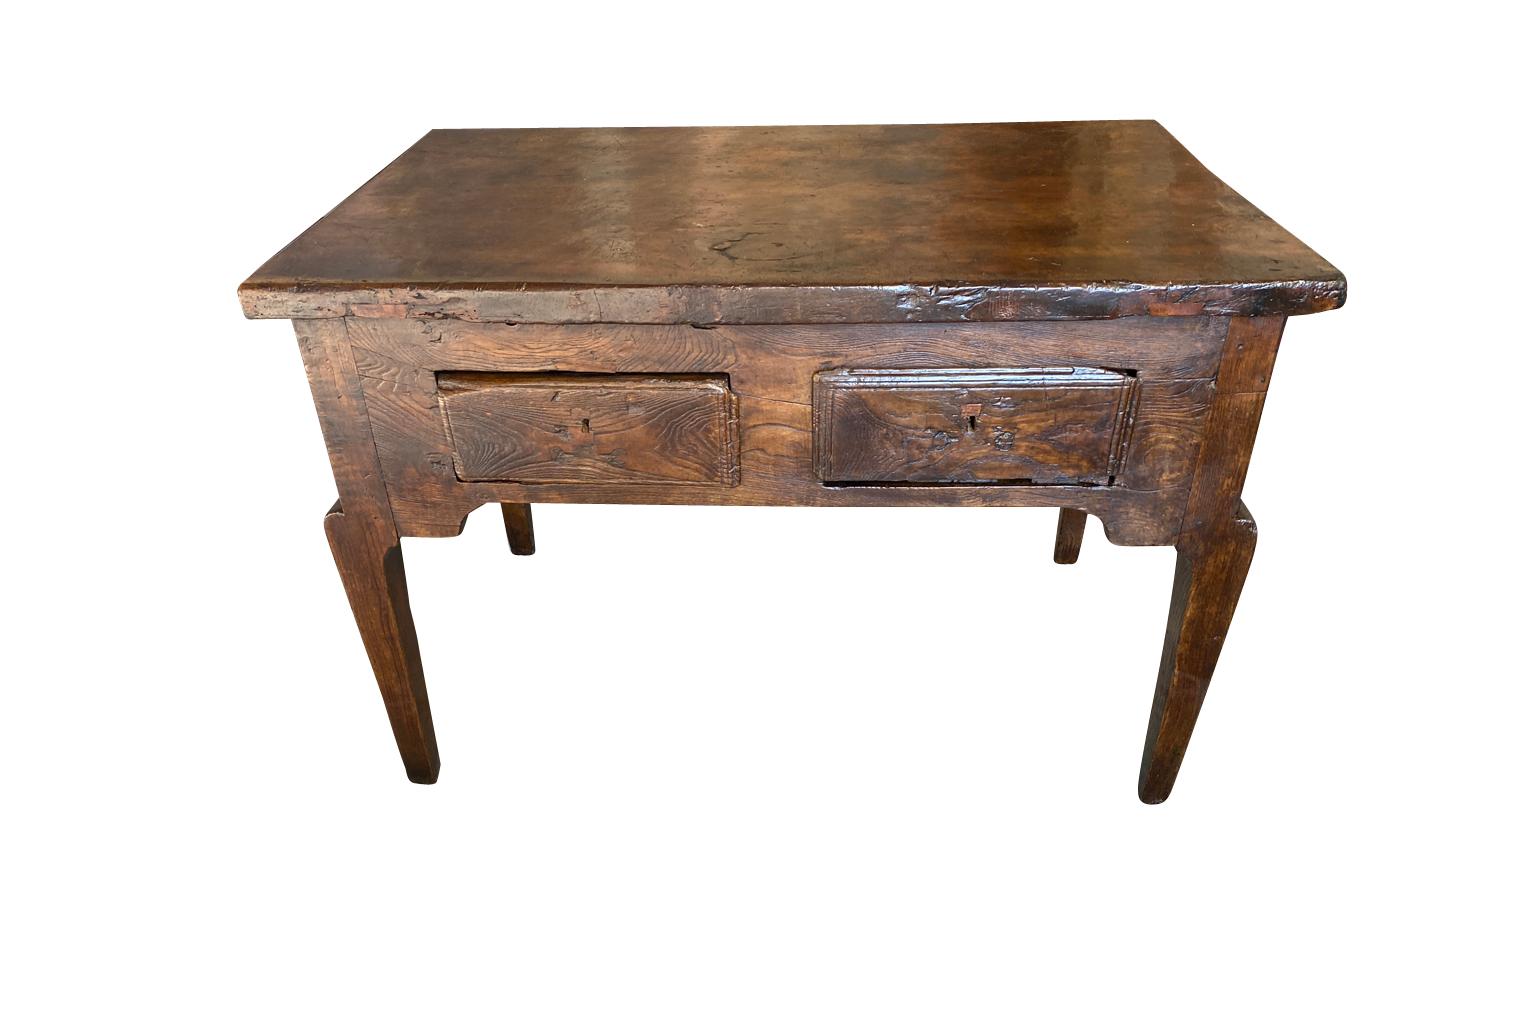 A very beautiful 18th century writing table - side table from the Catalan region of Spain. Wonderfully constructed from chestnut with a stunning solid board top, 2 drawers over tapered legs. Stunning graining and patina.